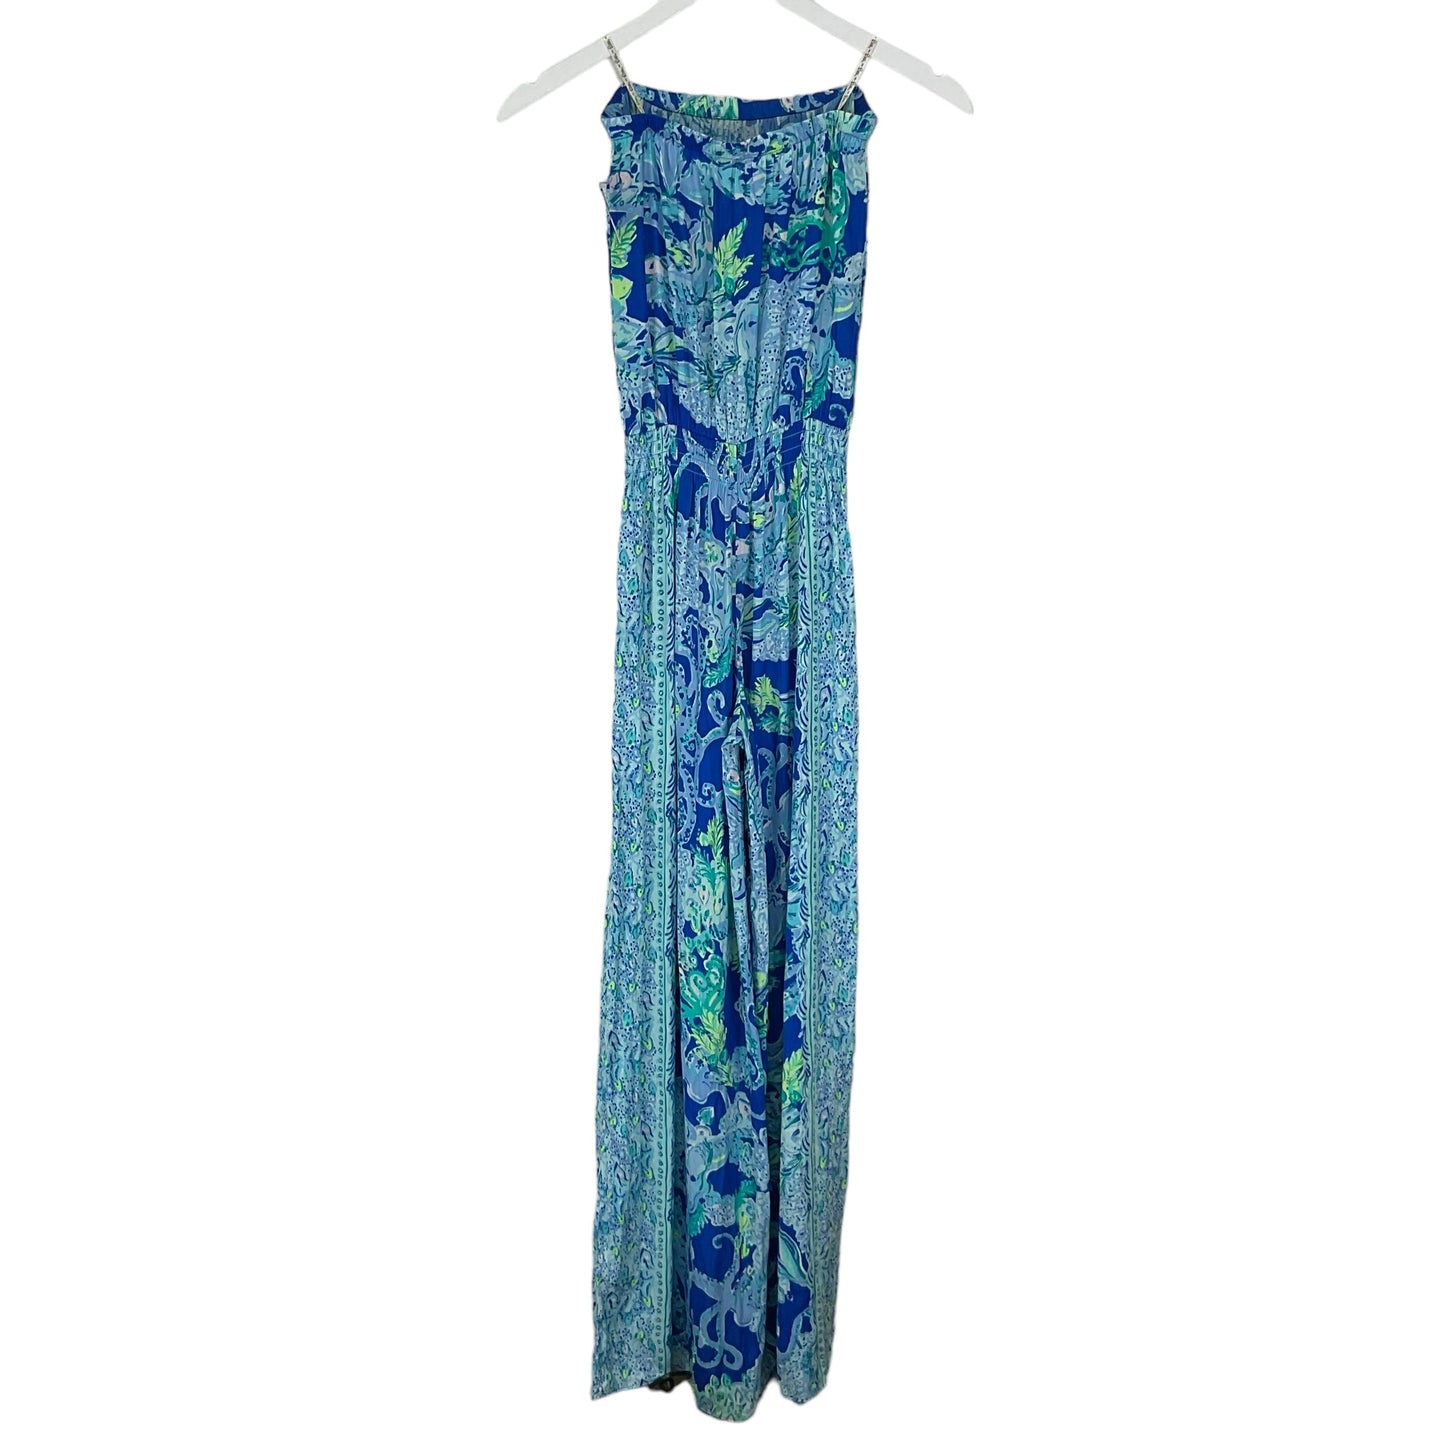 Blue & Green Jumpsuit Designer Lilly Pulitzer, Size Xs